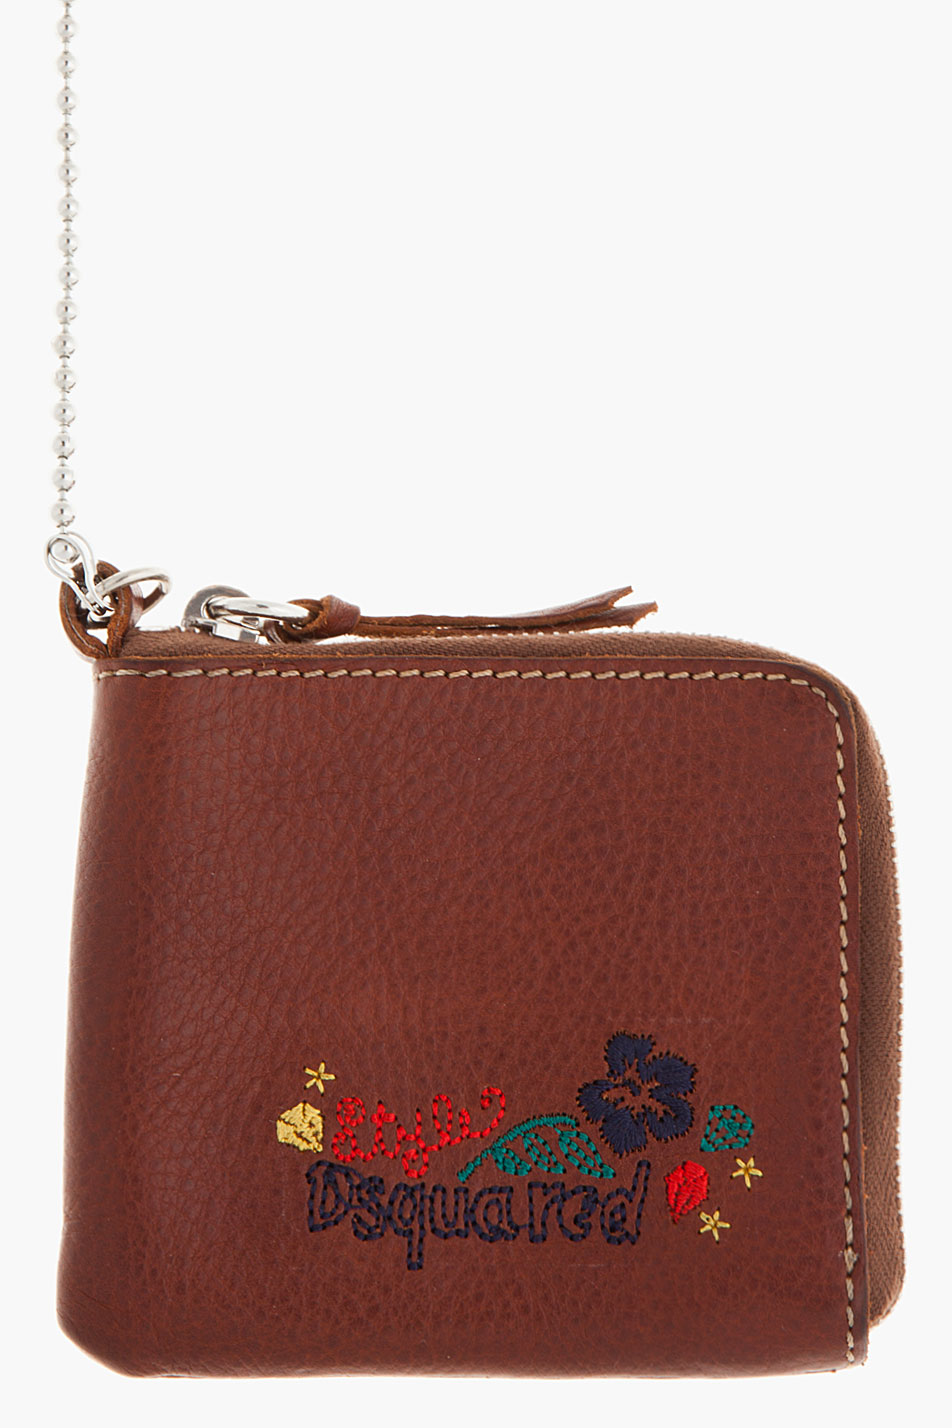 Dsquared2 Brown Embroidered Leather Keychain Wallet in Brown for Men | Lyst